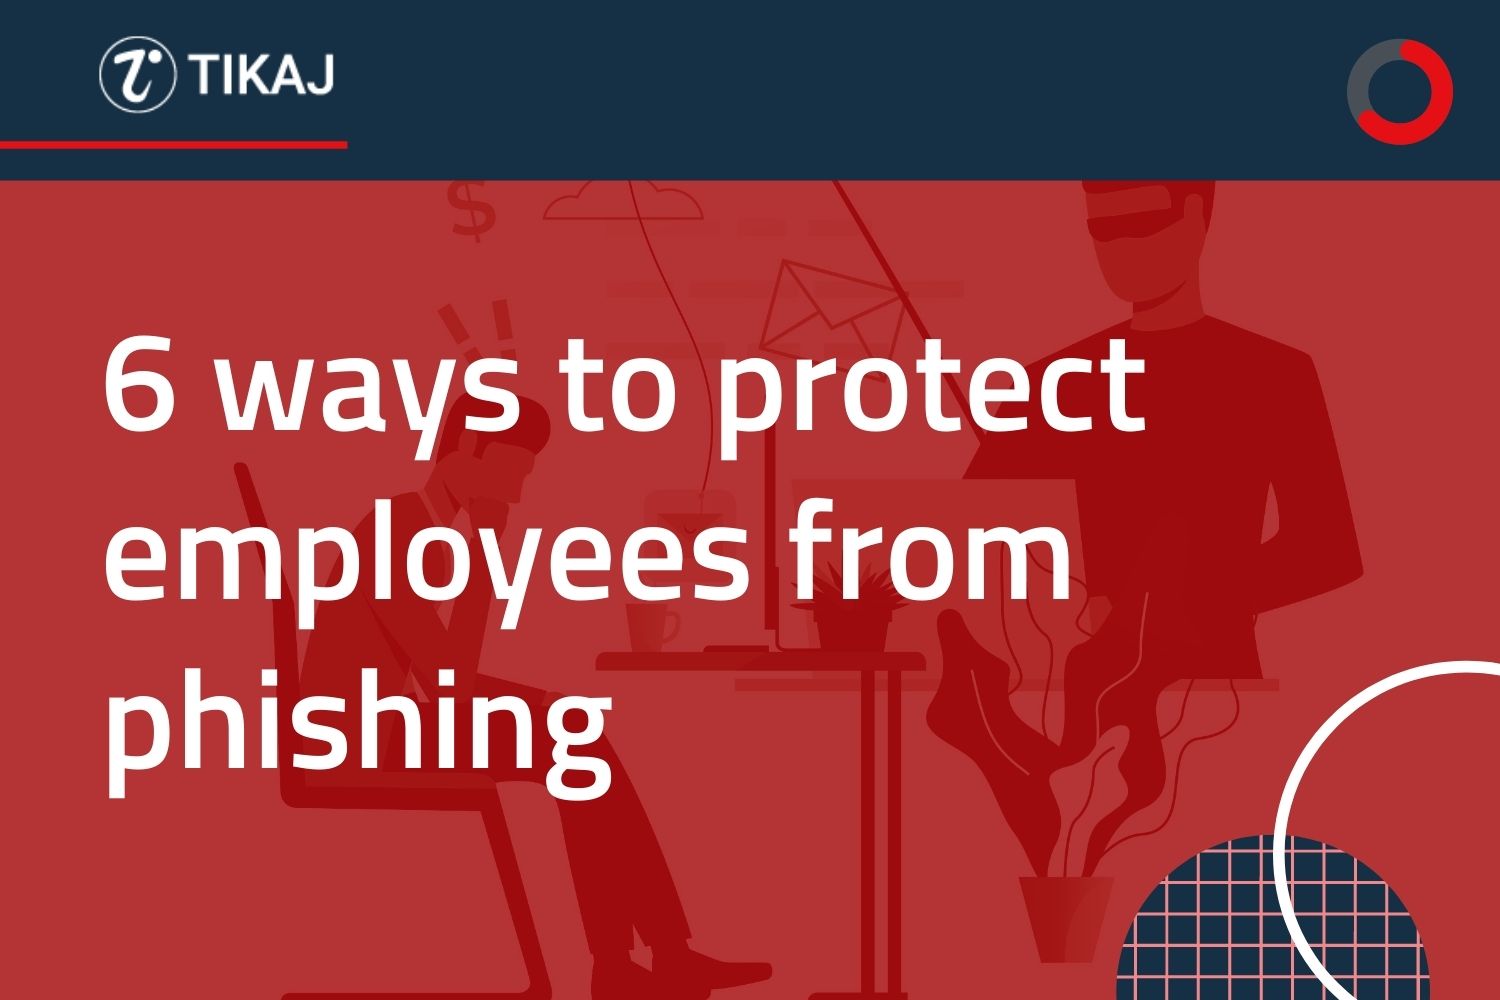 6 ways to protect employees from phishing